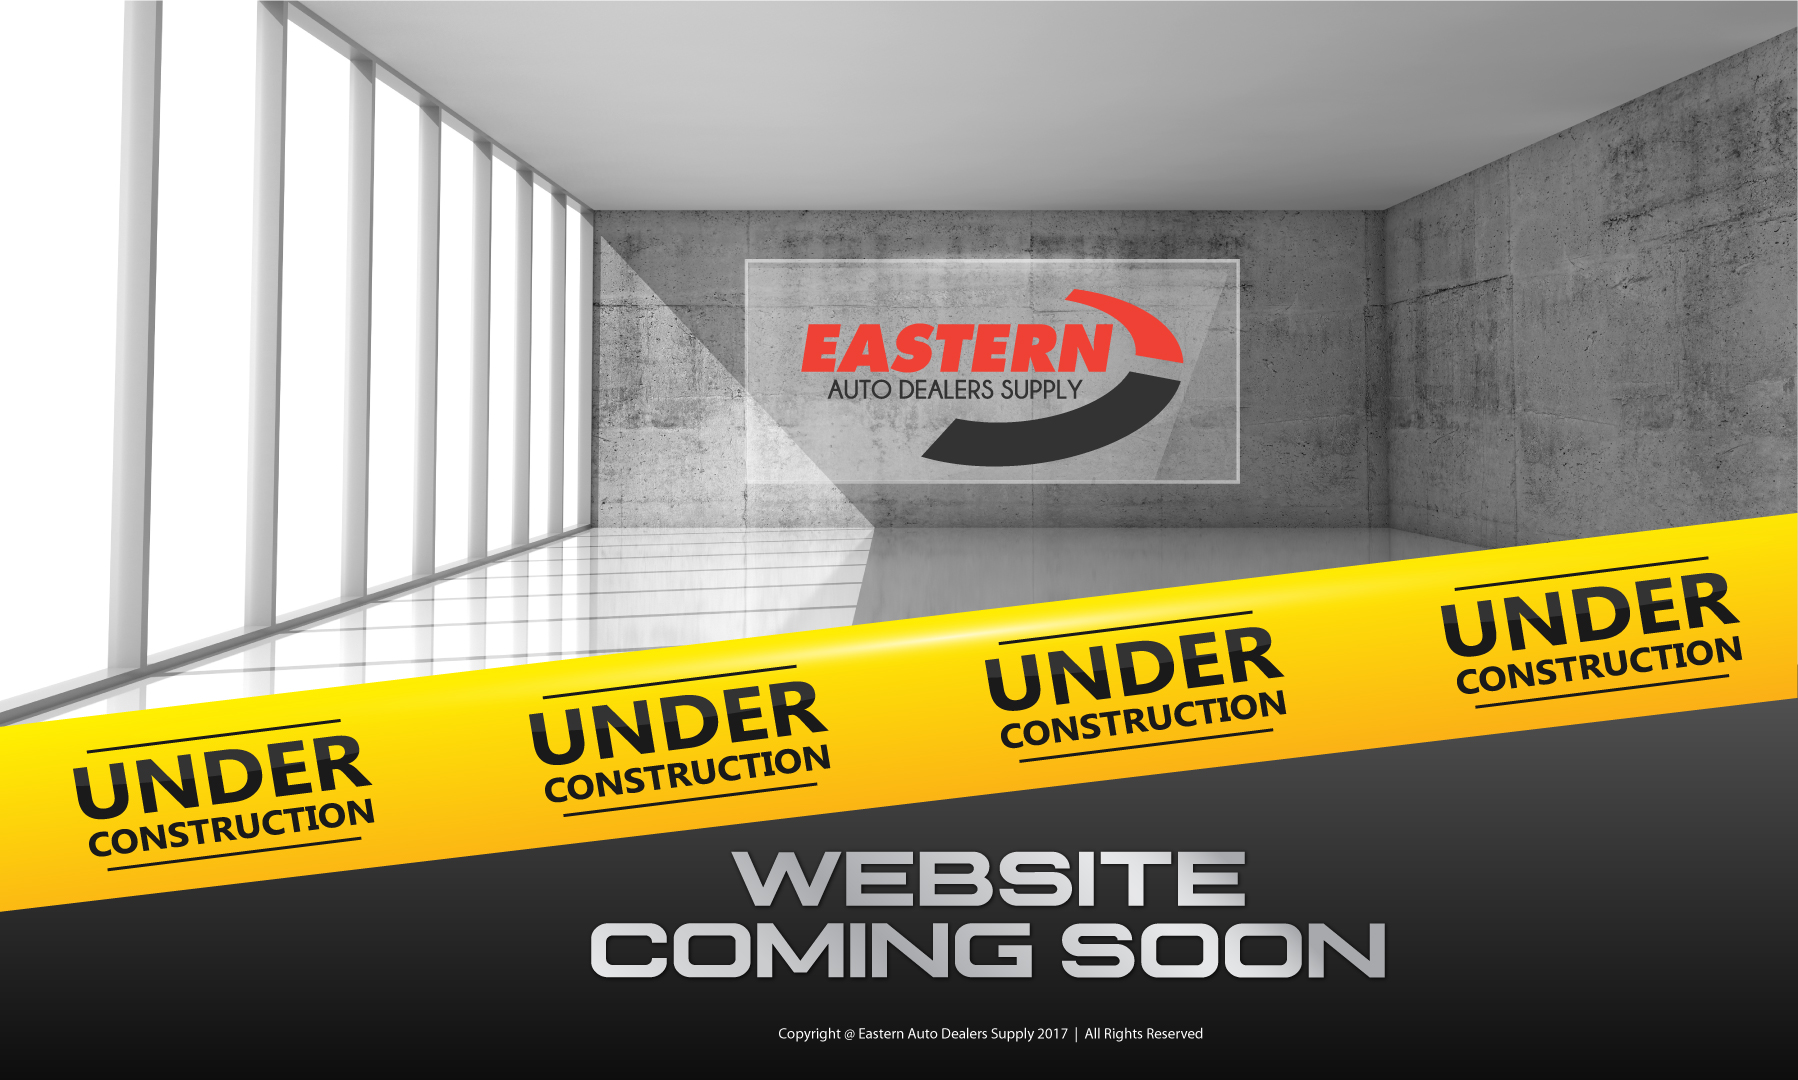 Eastern Auto Dealers Supply